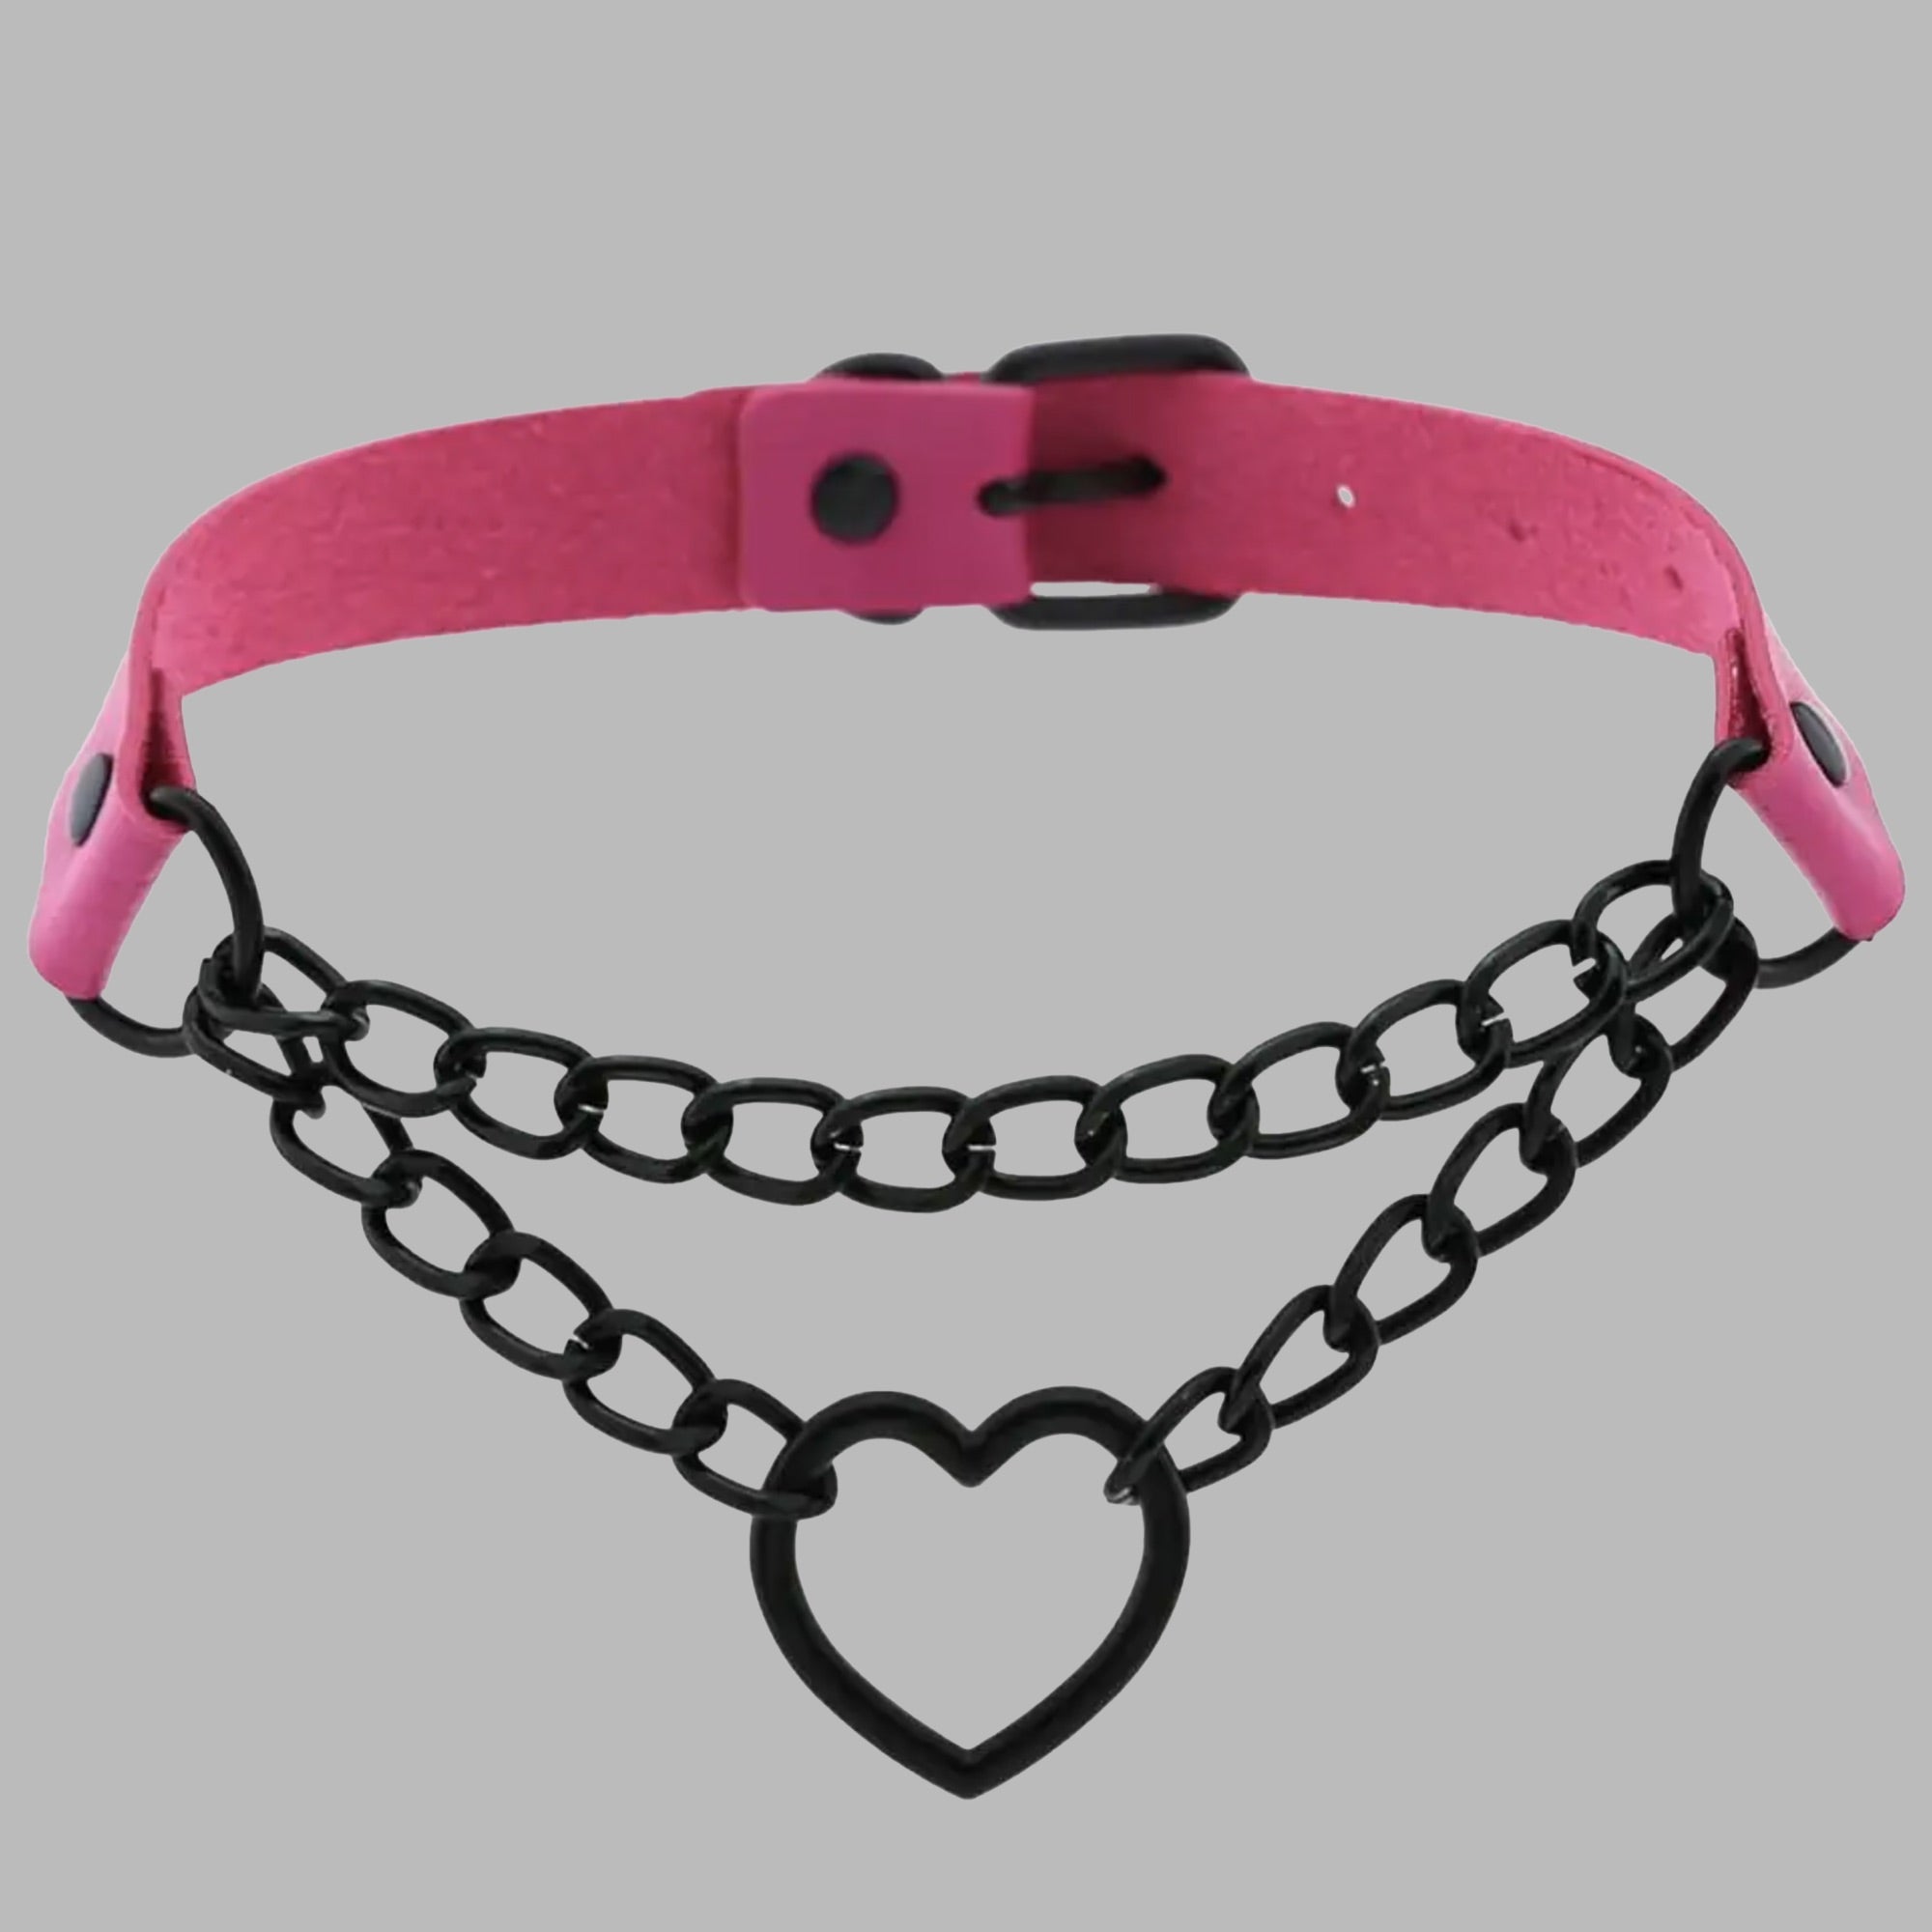 Chained Heart Choker - Hot Pink & Black